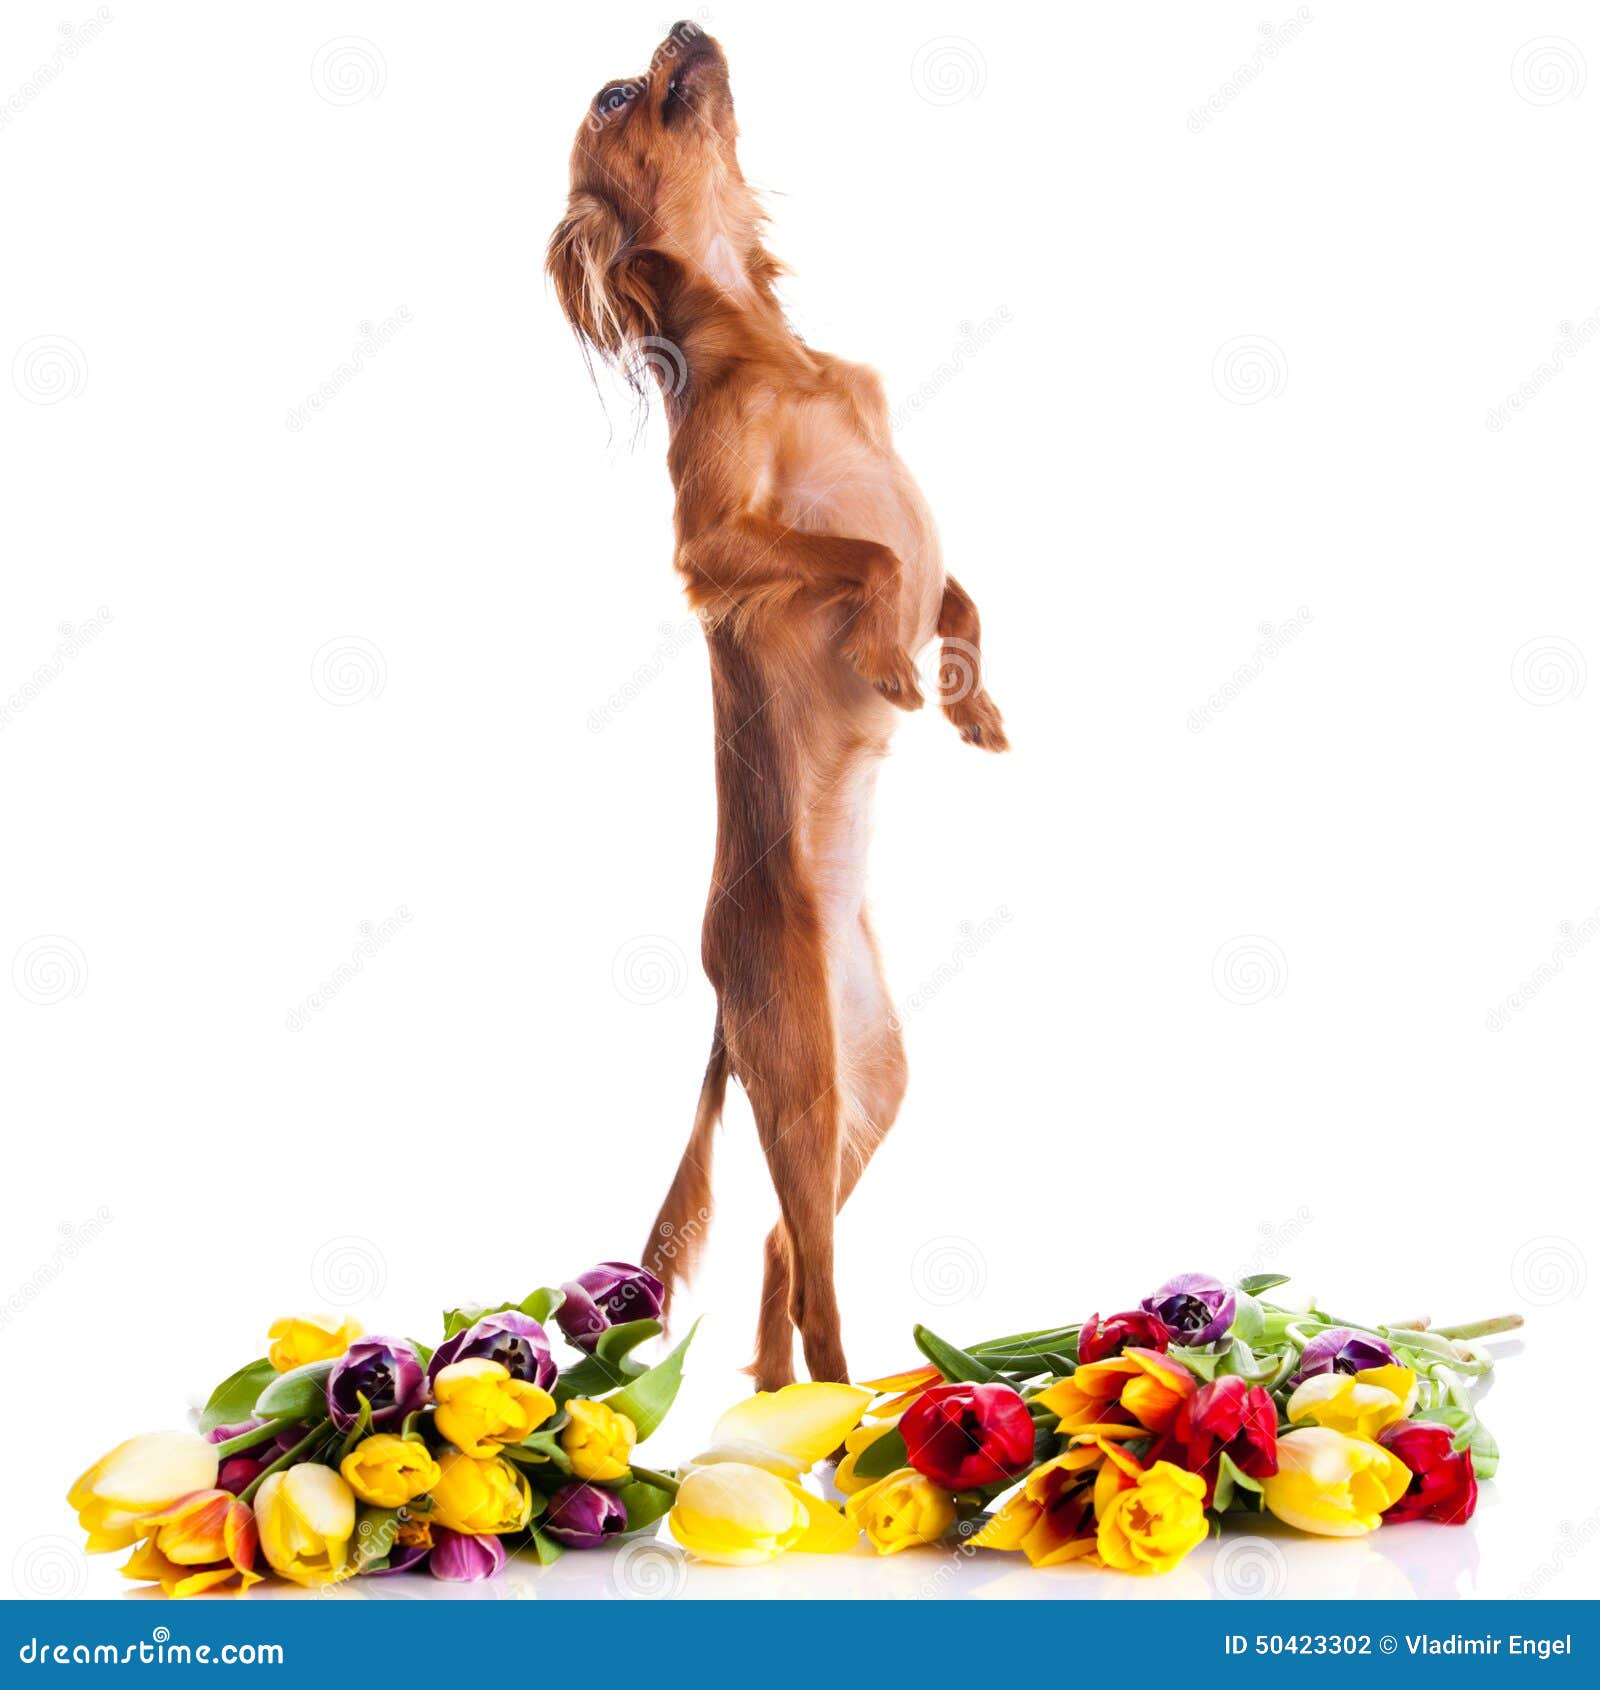 funny dog and fowers  on white background